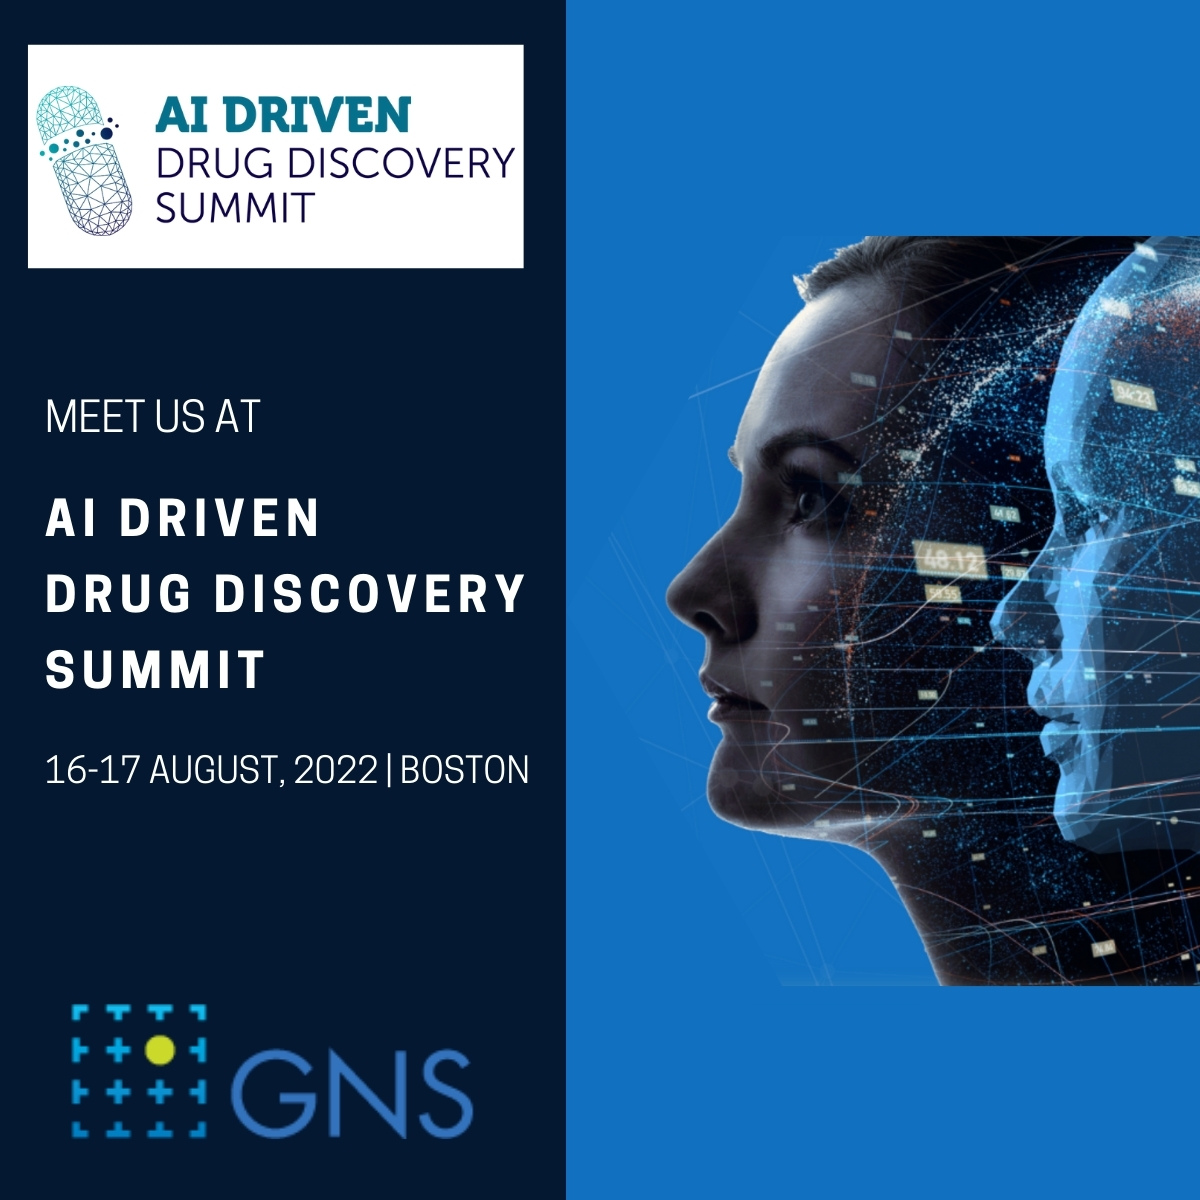 Meet us at AI Drug Driven Discovery Summit